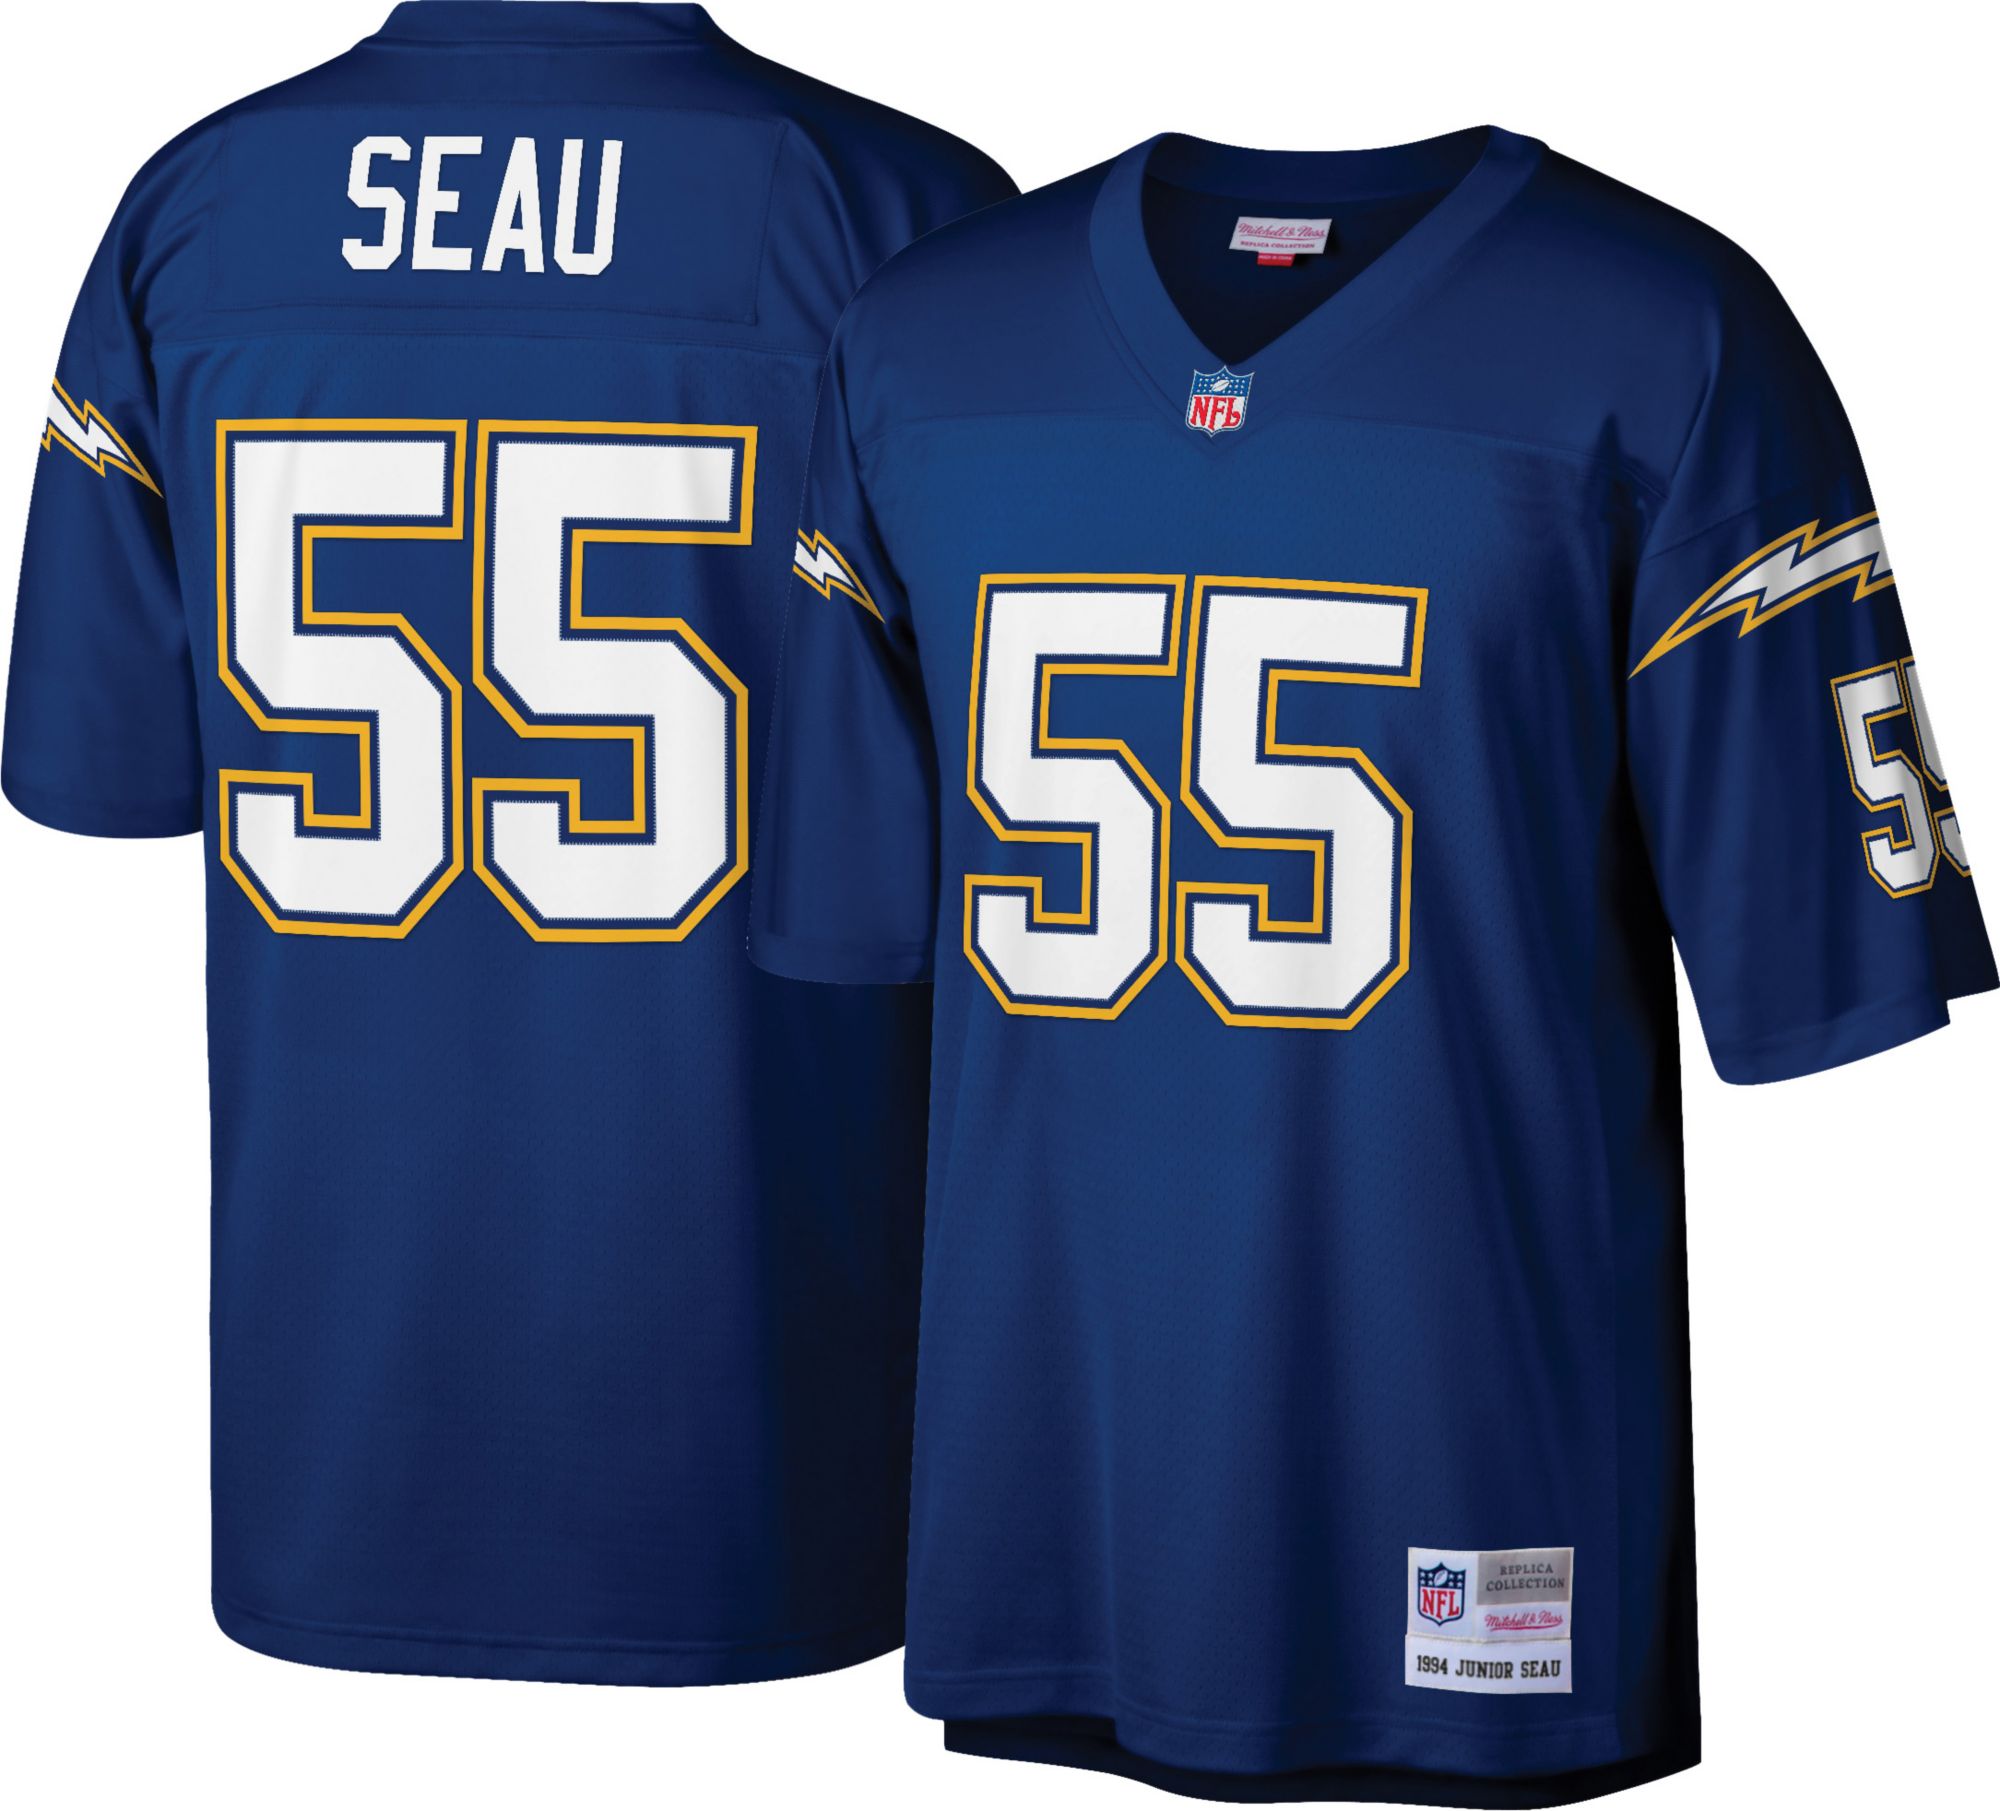 chargers seau jersey